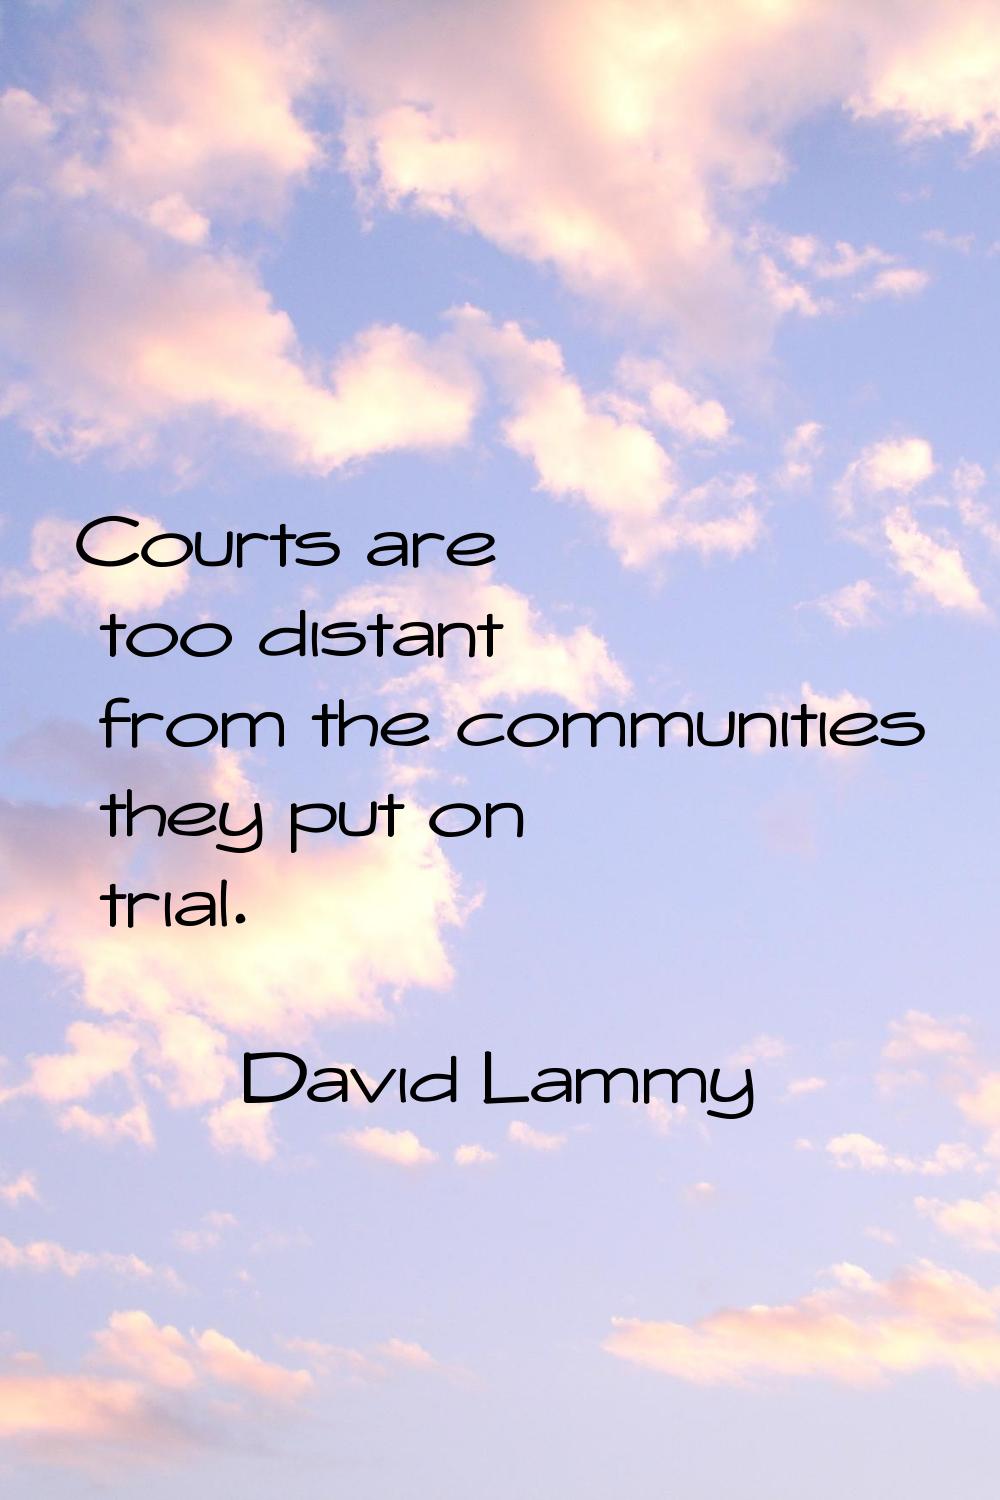 Courts are too distant from the communities they put on trial.